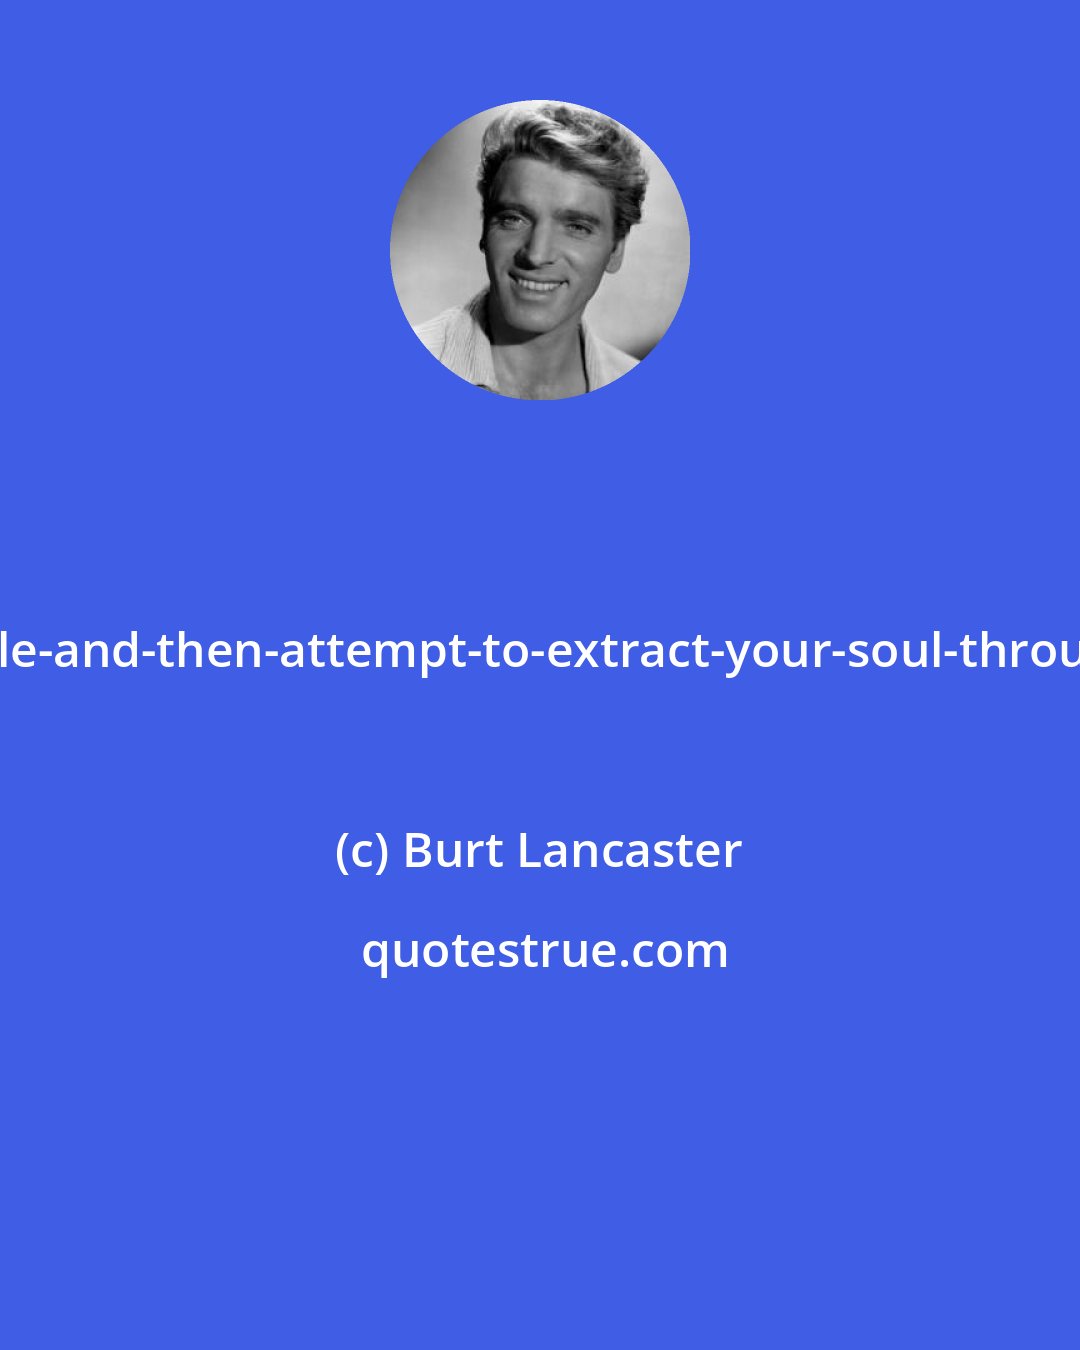 Burt Lancaster: I'm-going-to-tilt-my-head-at-a-perpendicular-angle-and-then-attempt-to-extract-your-soul-through-your-mouth-like-some-giant-alien-sucker-fish